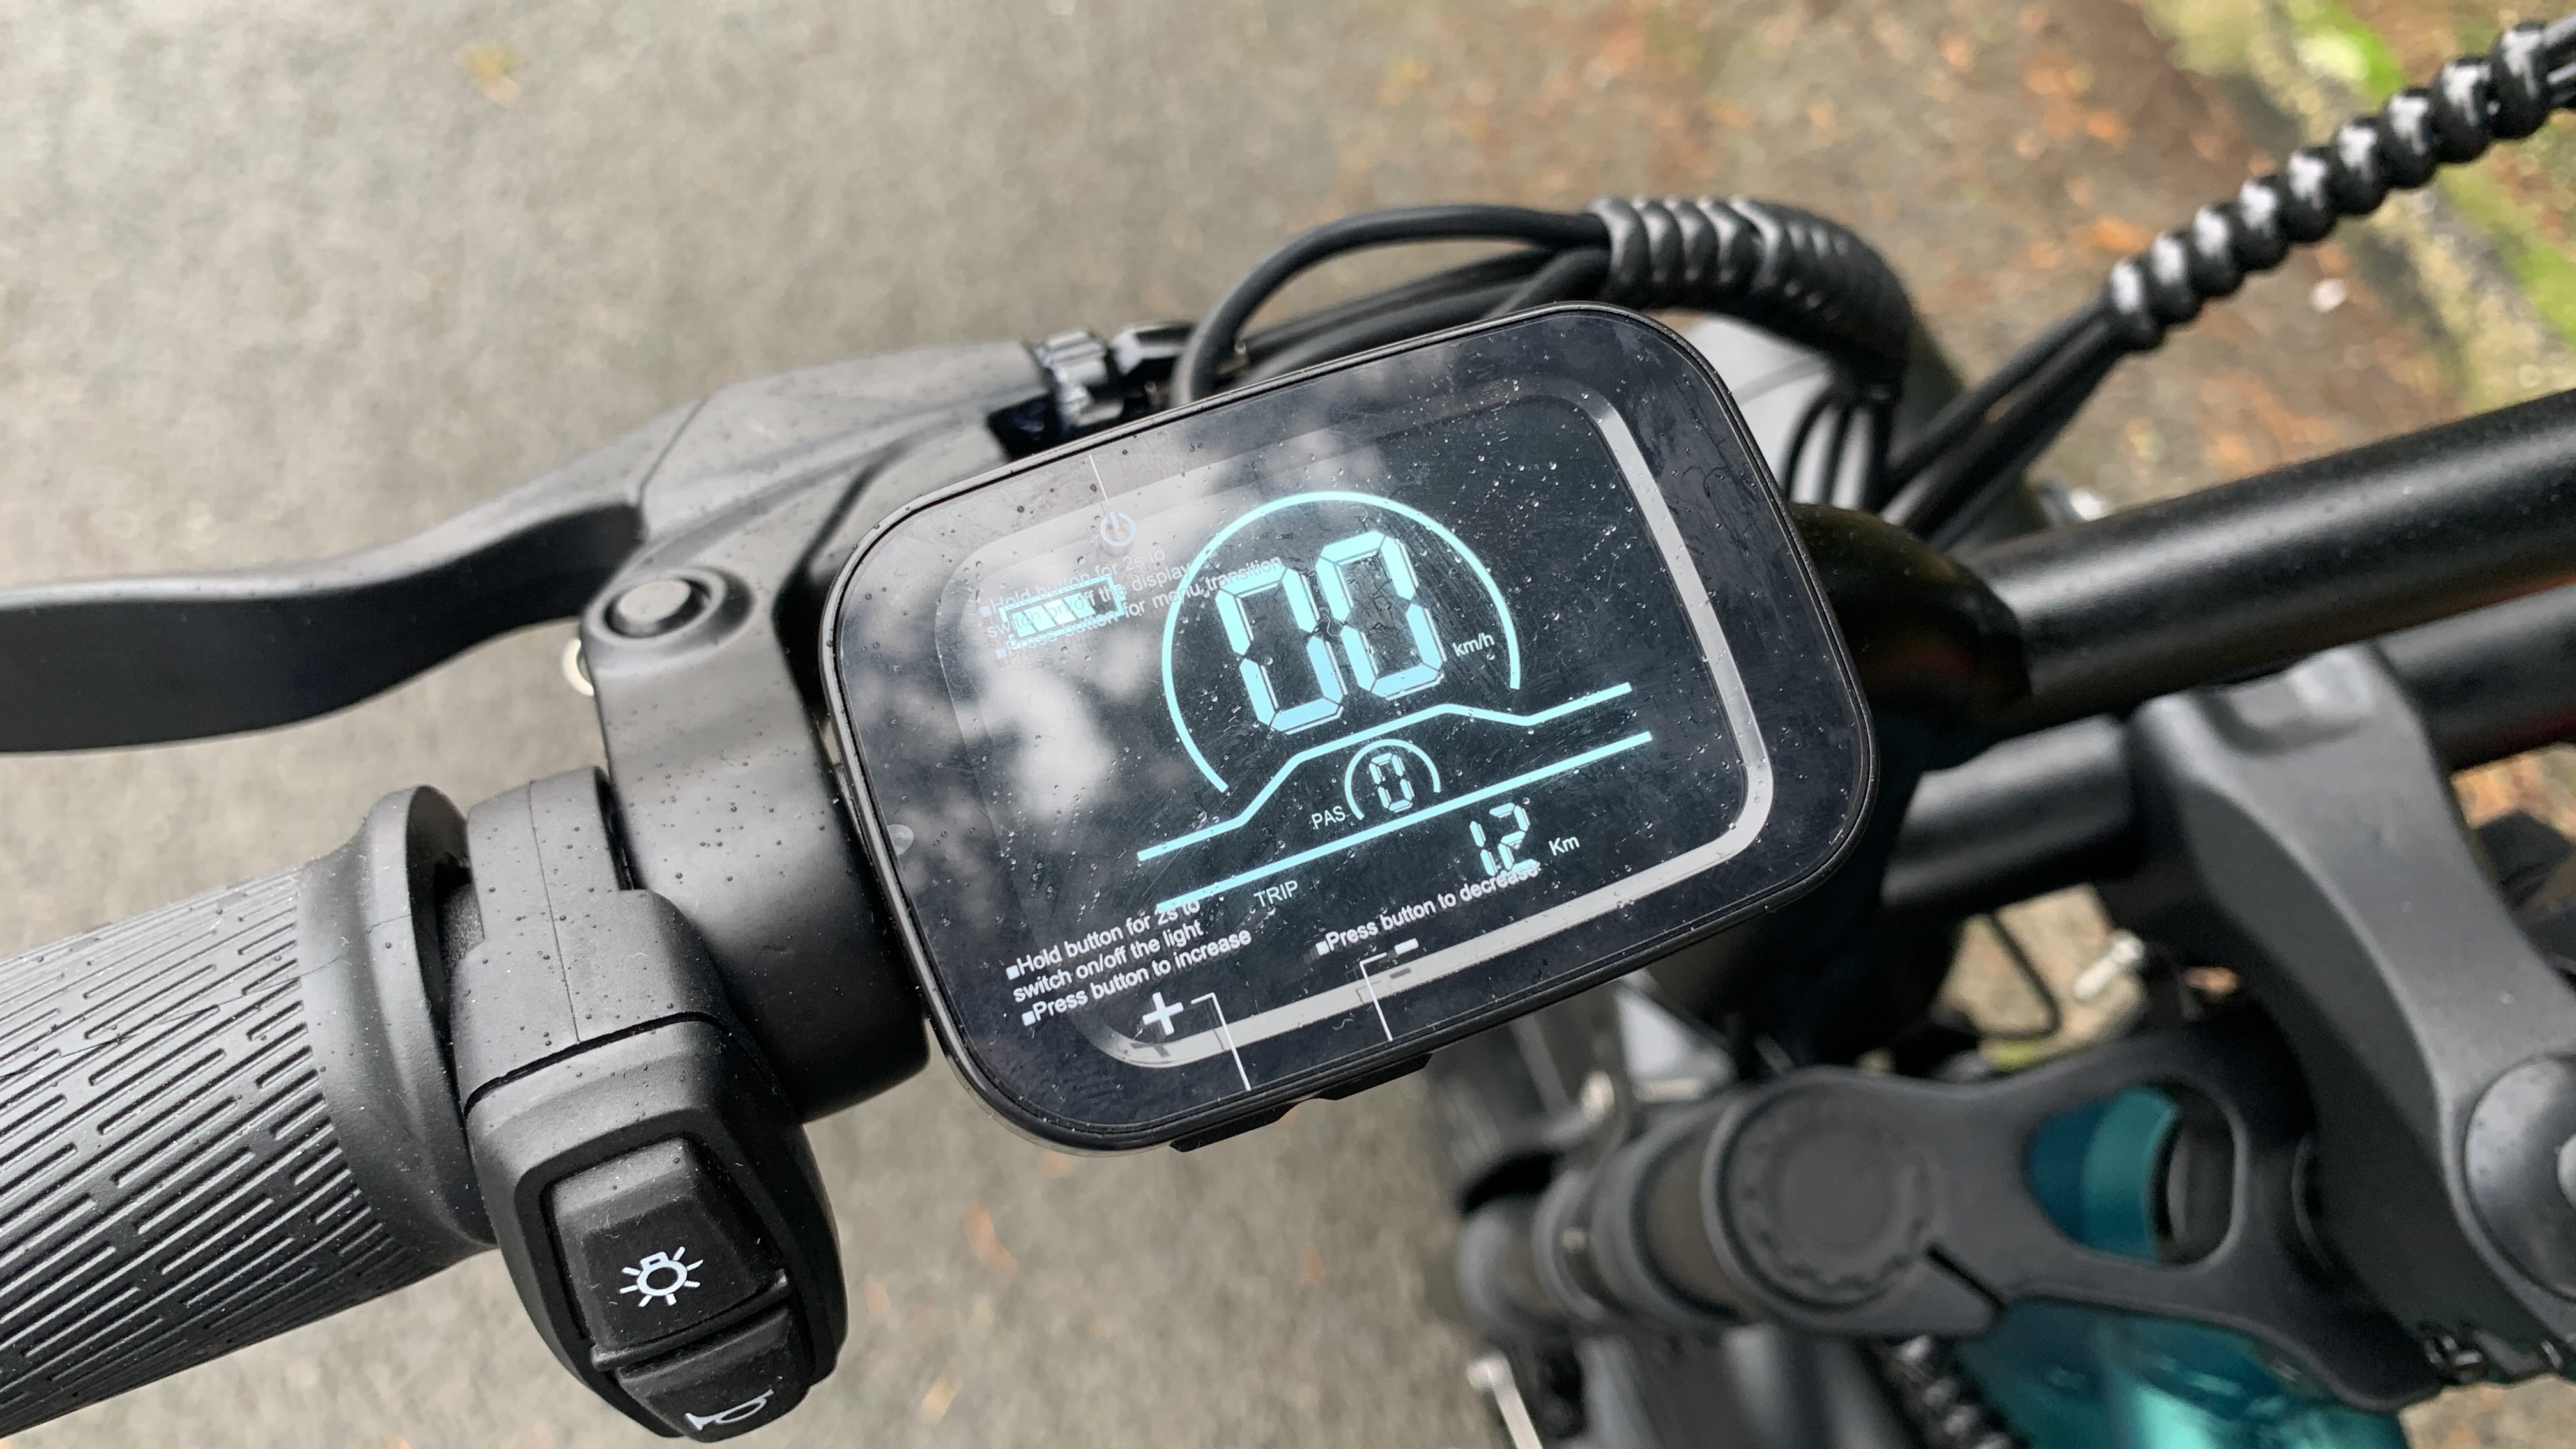 Engwe M20 E-Bike with digital display and pedal assist controls